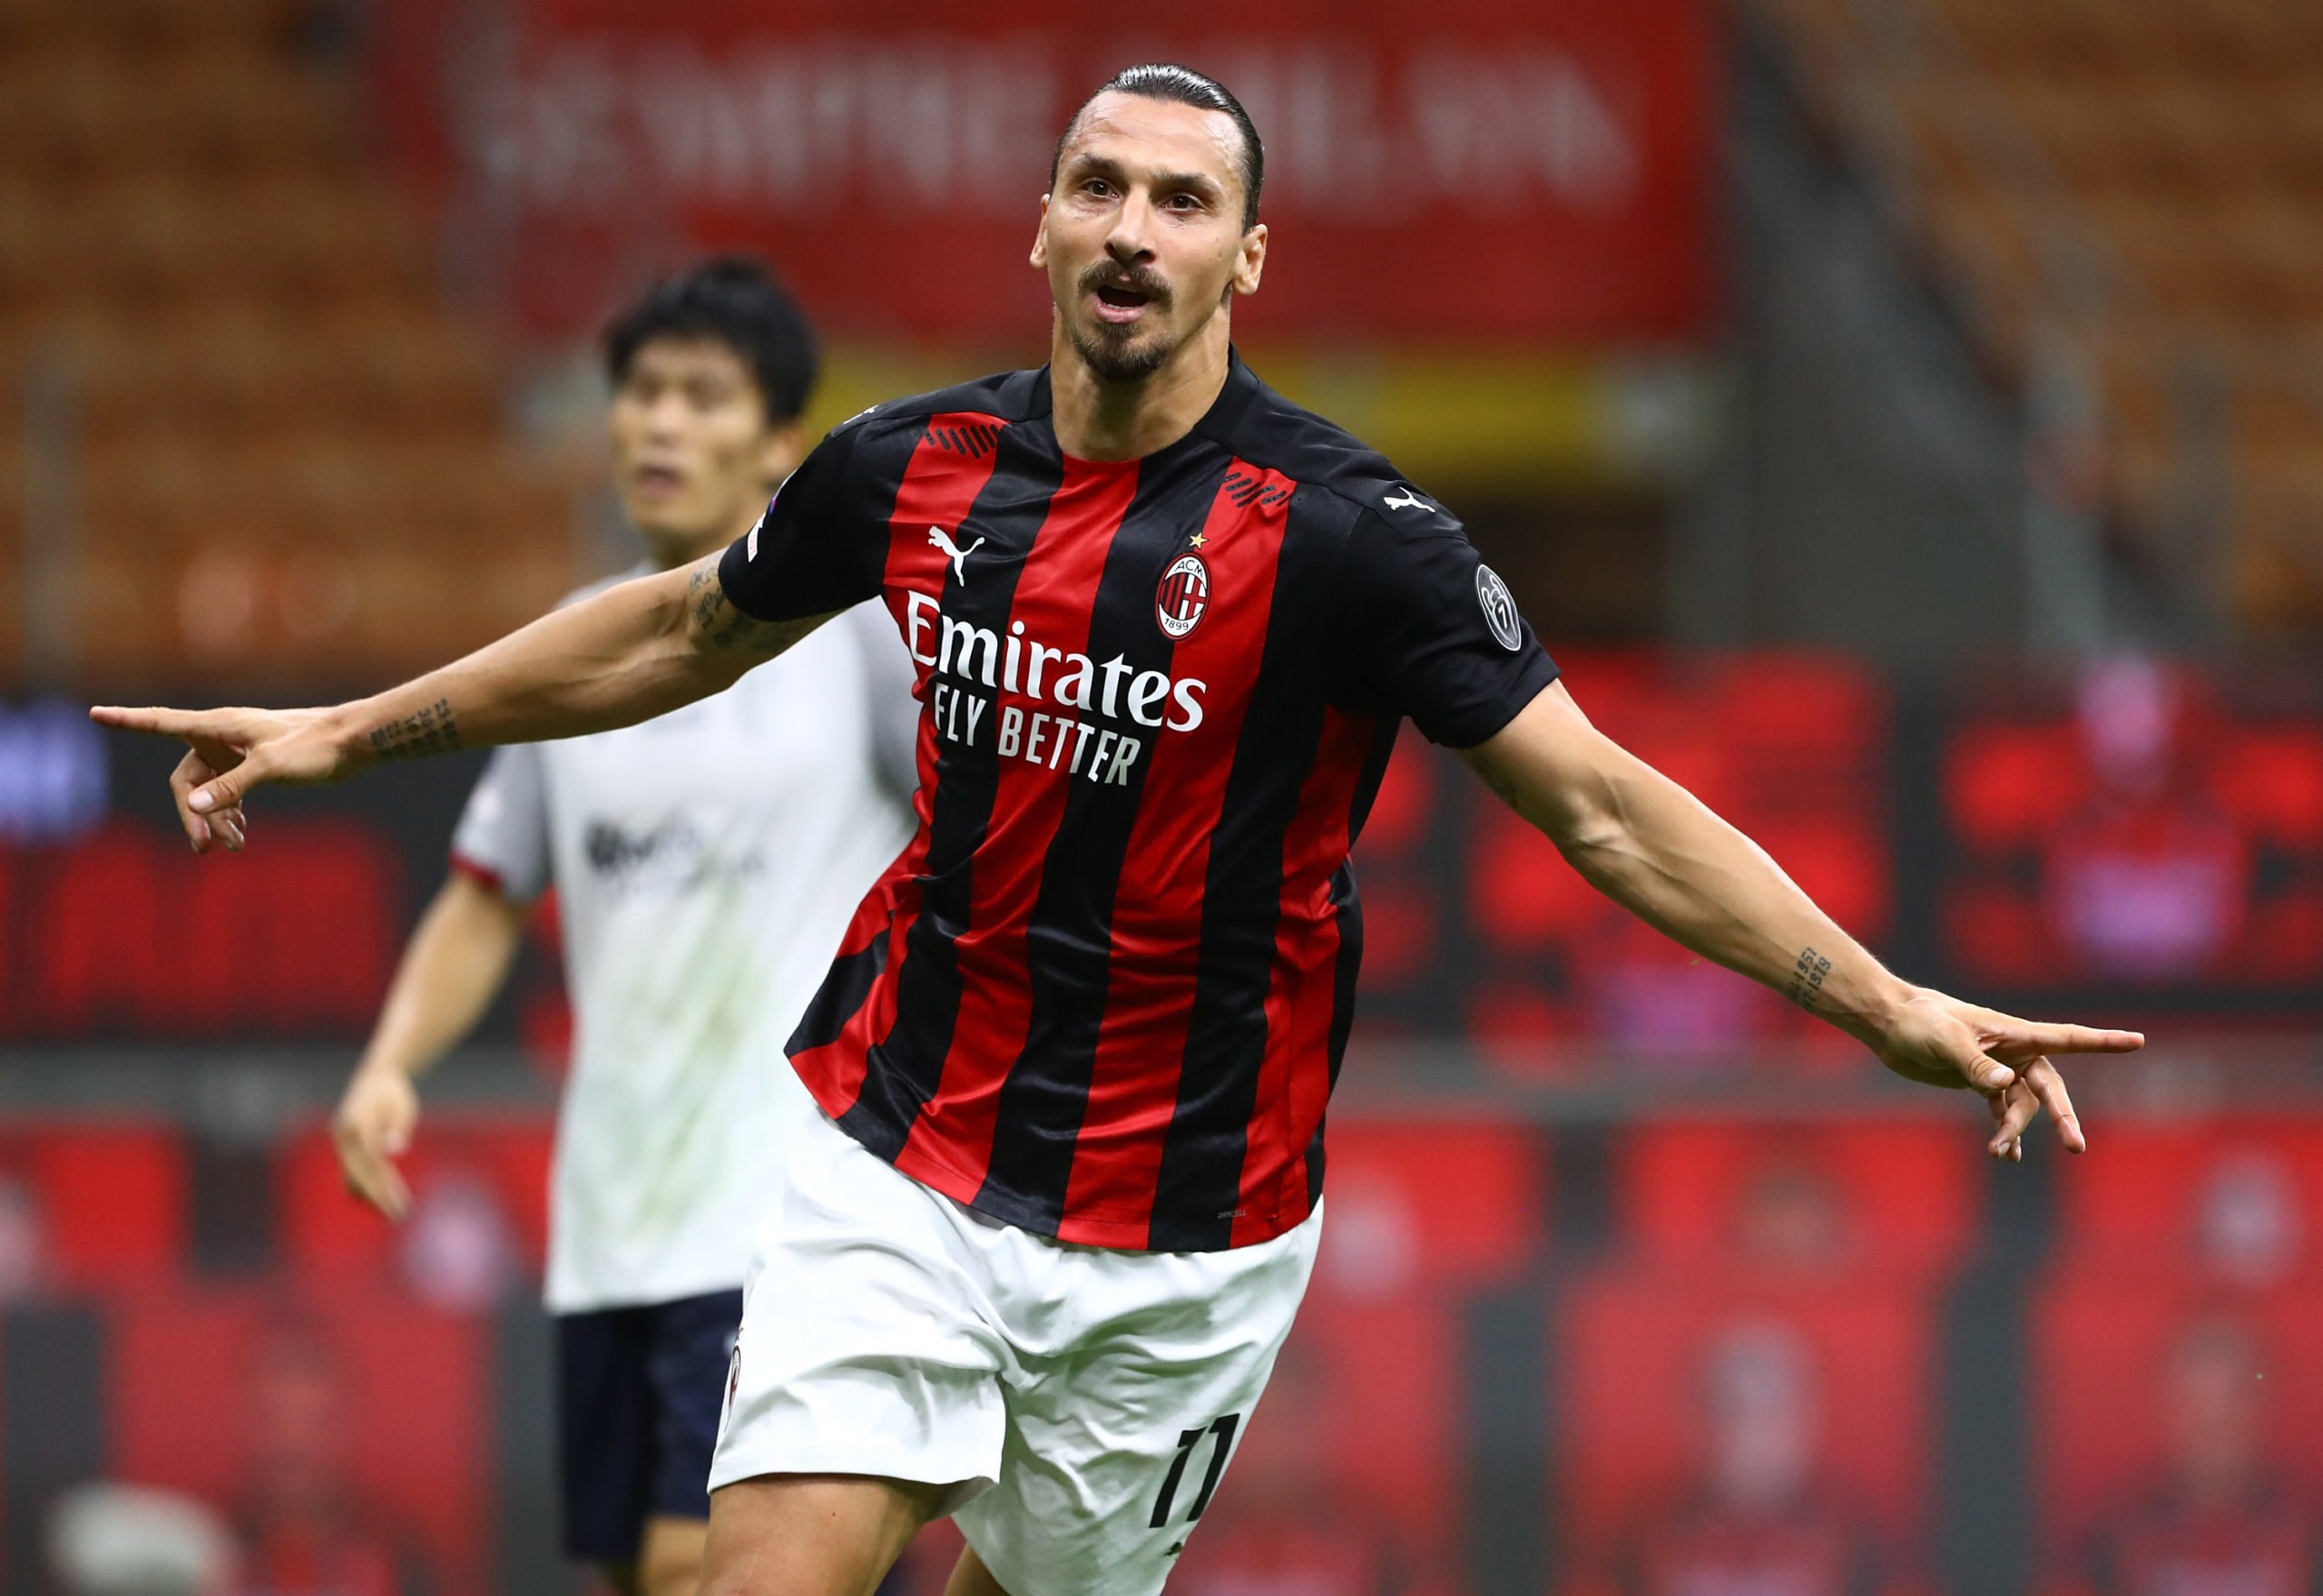 Watch: Zlatan Ibrahimovic works hard to be fit for Celtic Park clash